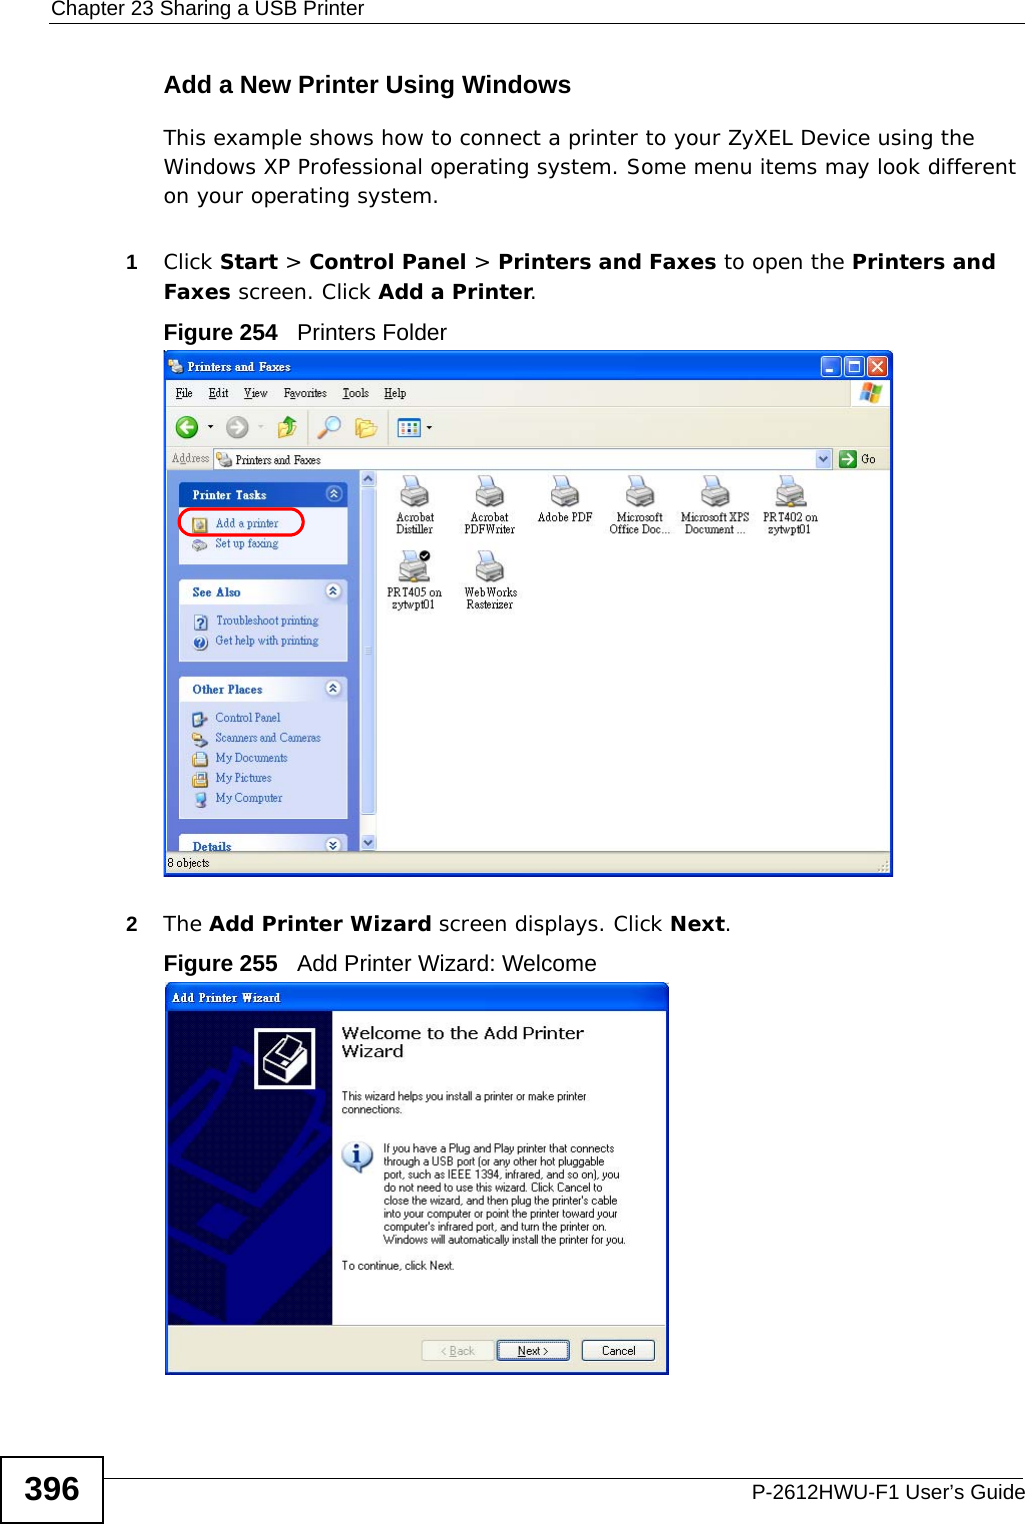 Chapter 23 Sharing a USB PrinterP-2612HWU-F1 User’s Guide396Add a New Printer Using WindowsThis example shows how to connect a printer to your ZyXEL Device using the Windows XP Professional operating system. Some menu items may look different on your operating system.1Click Start &gt; Control Panel &gt; Printers and Faxes to open the Printers and Faxes screen. Click Add a Printer. Figure 254   Printers Folder2The Add Printer Wizard screen displays. Click Next.Figure 255   Add Printer Wizard: Welcome